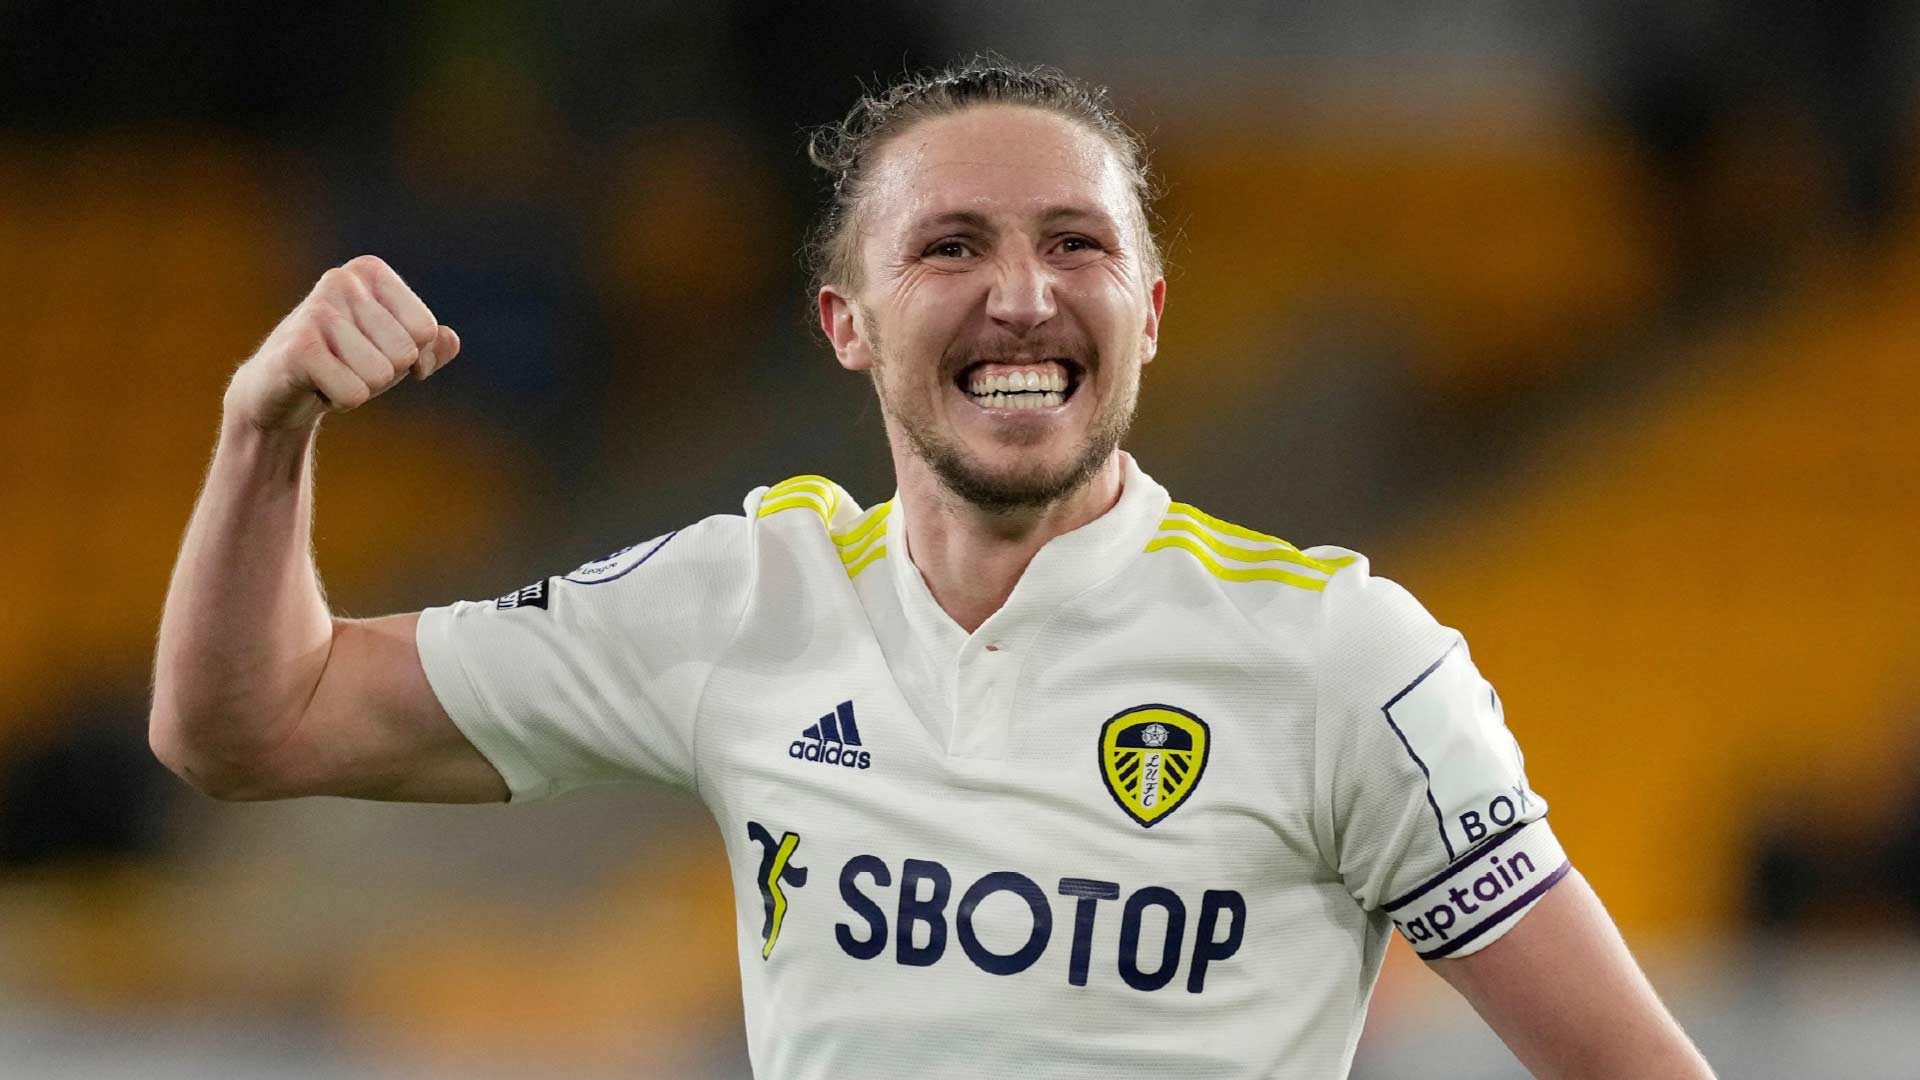 A photograph of Luke Ayling wearing the captain's armband, pumping his fist, grinning. All the good stuff